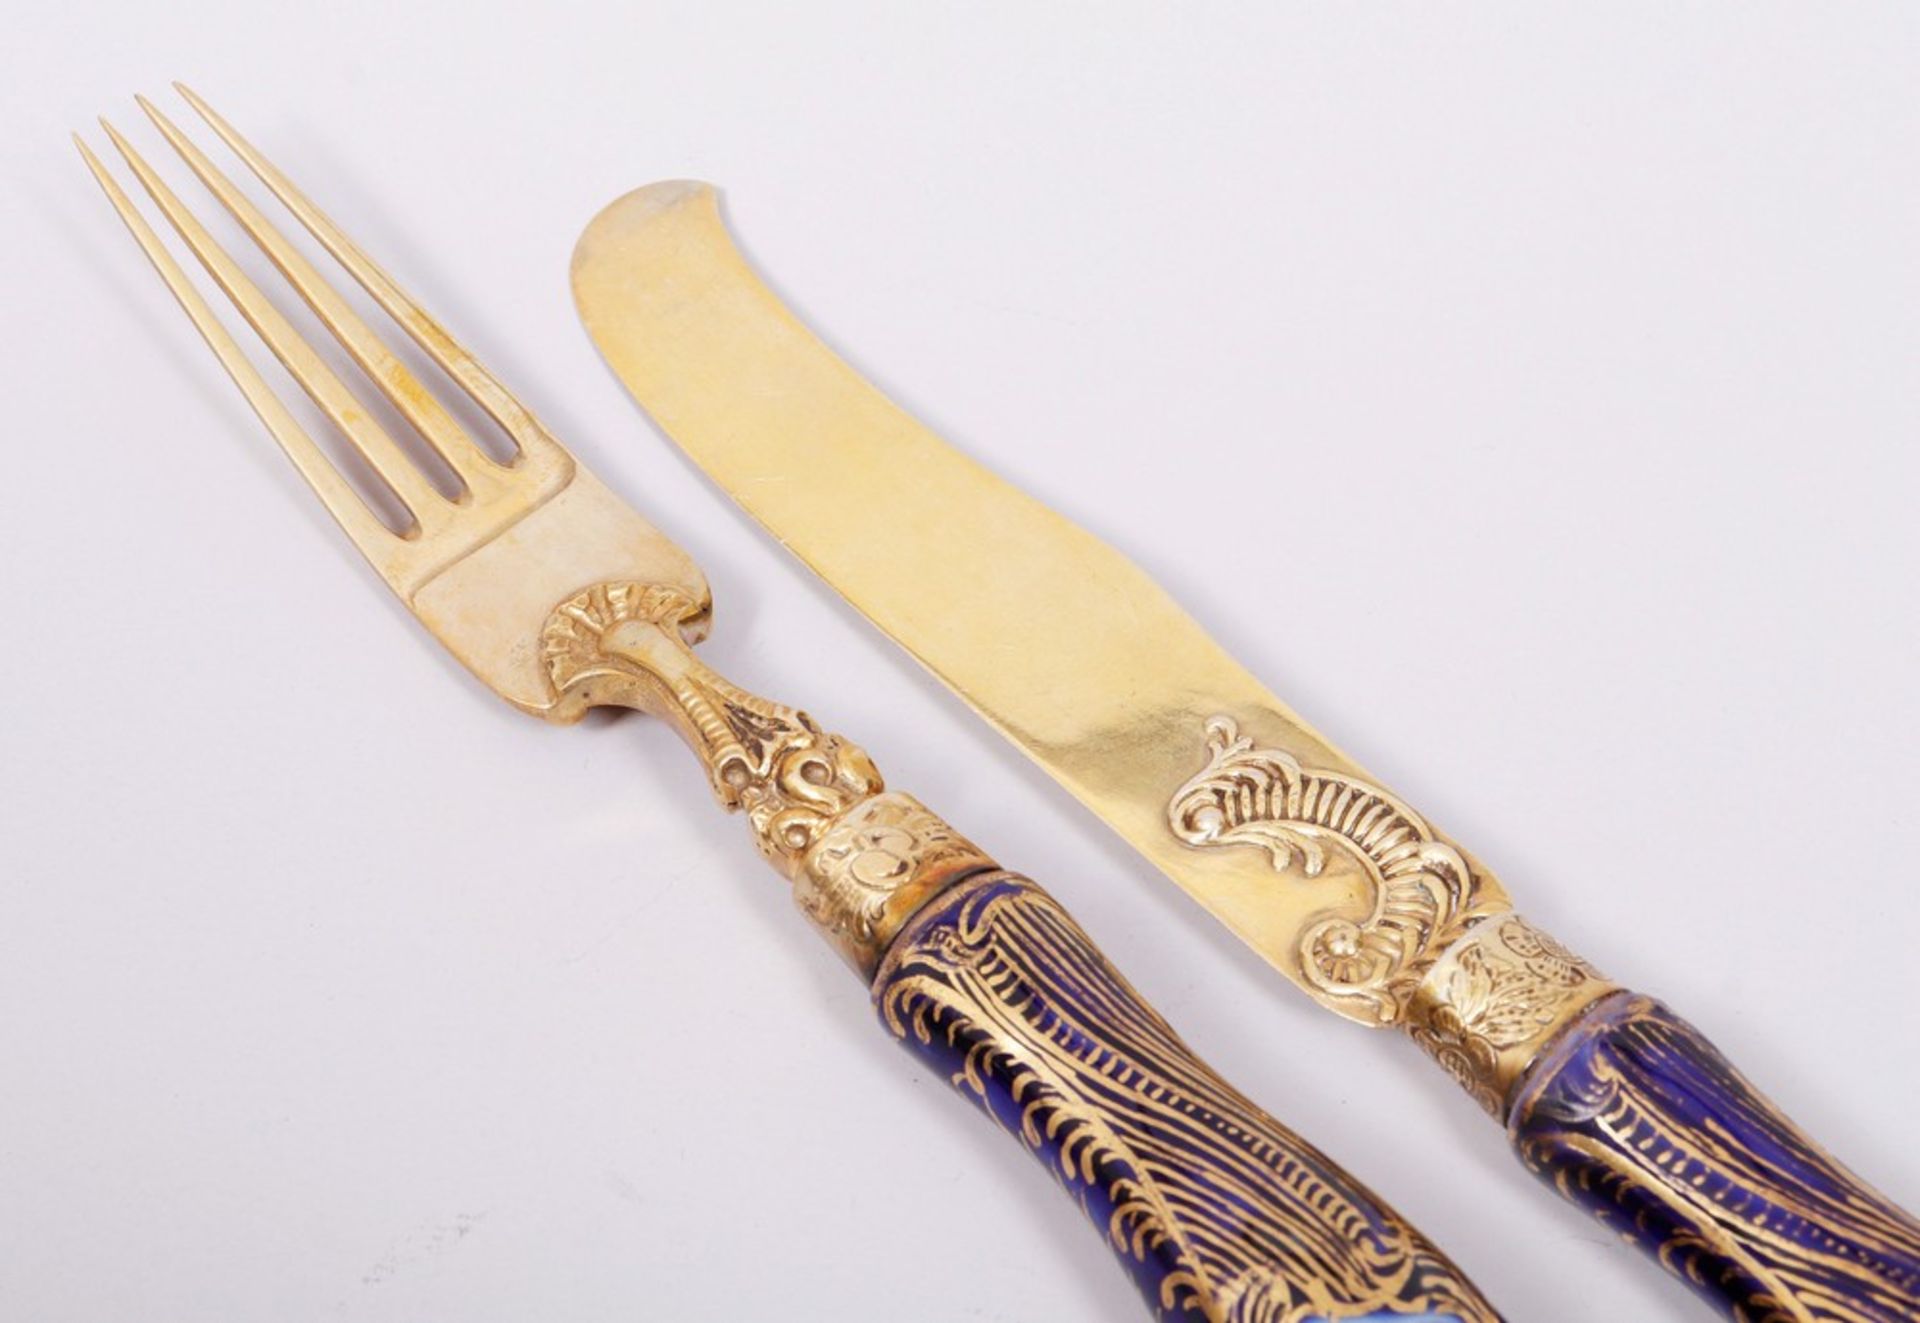 Late Baroque dining knife and fork, silver/gilt, probably German, mid-18th C. - Image 2 of 5